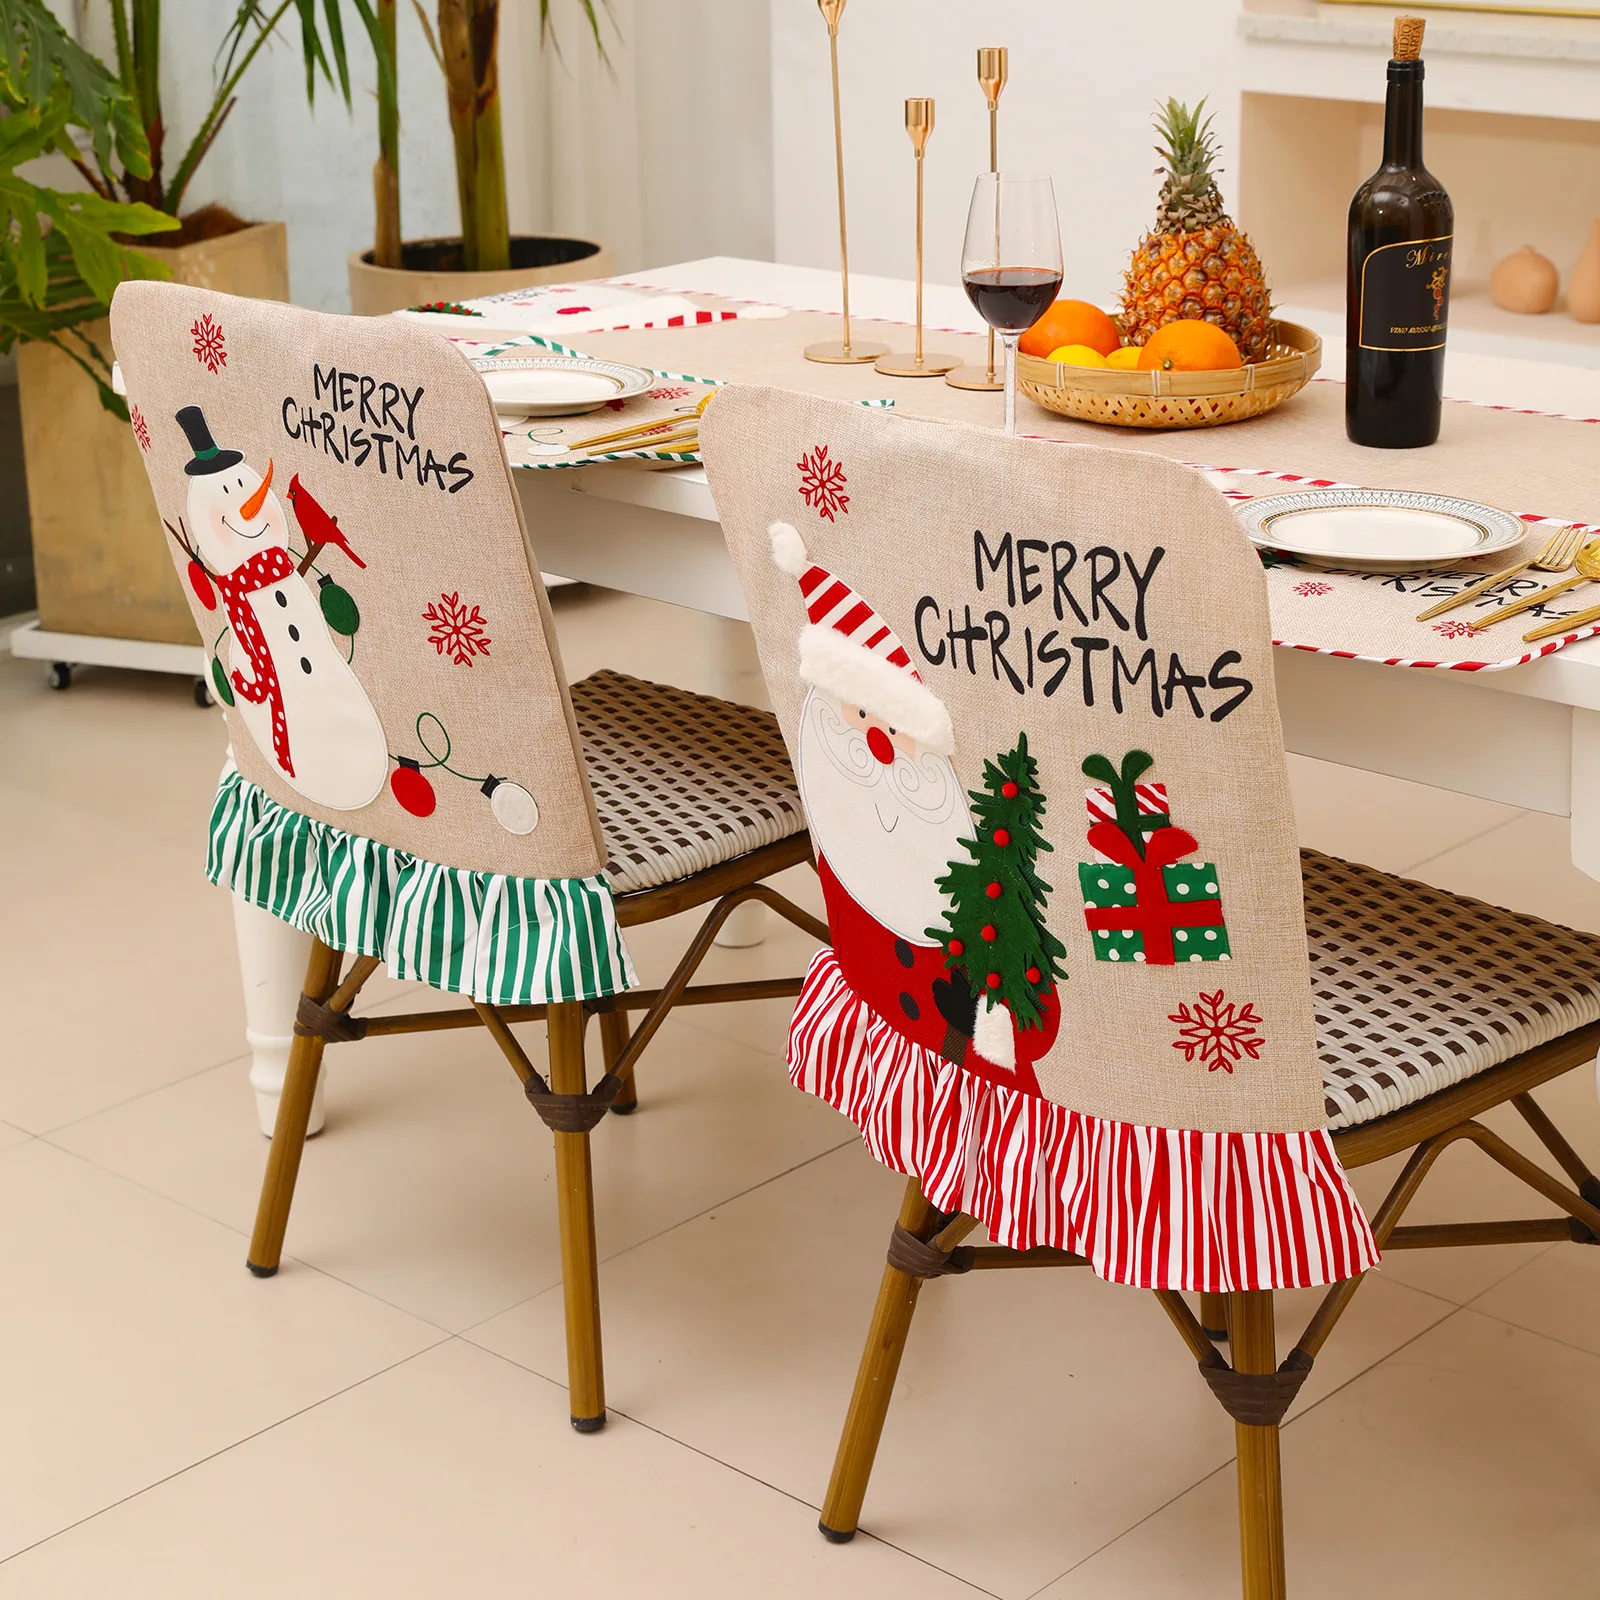 

2021 Happy New Year Embroidery Chair Cover Christmas Snowman Santa Claus Noel Merry Christmas Decor For Home Naviidad Supplies